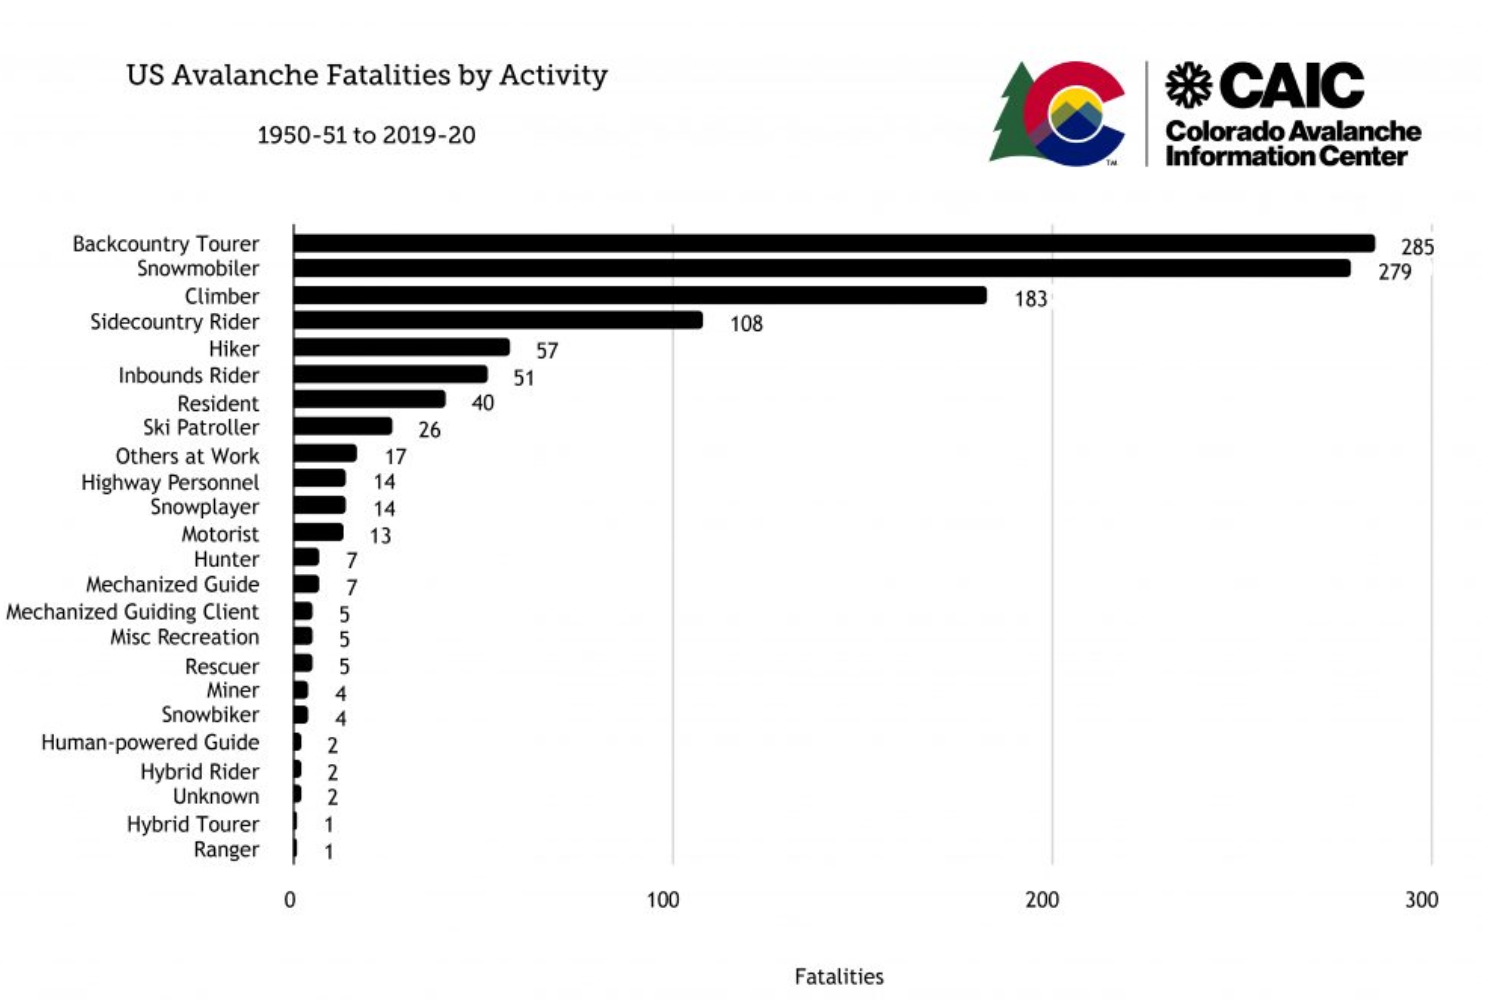 US avalanche fatalities by activity